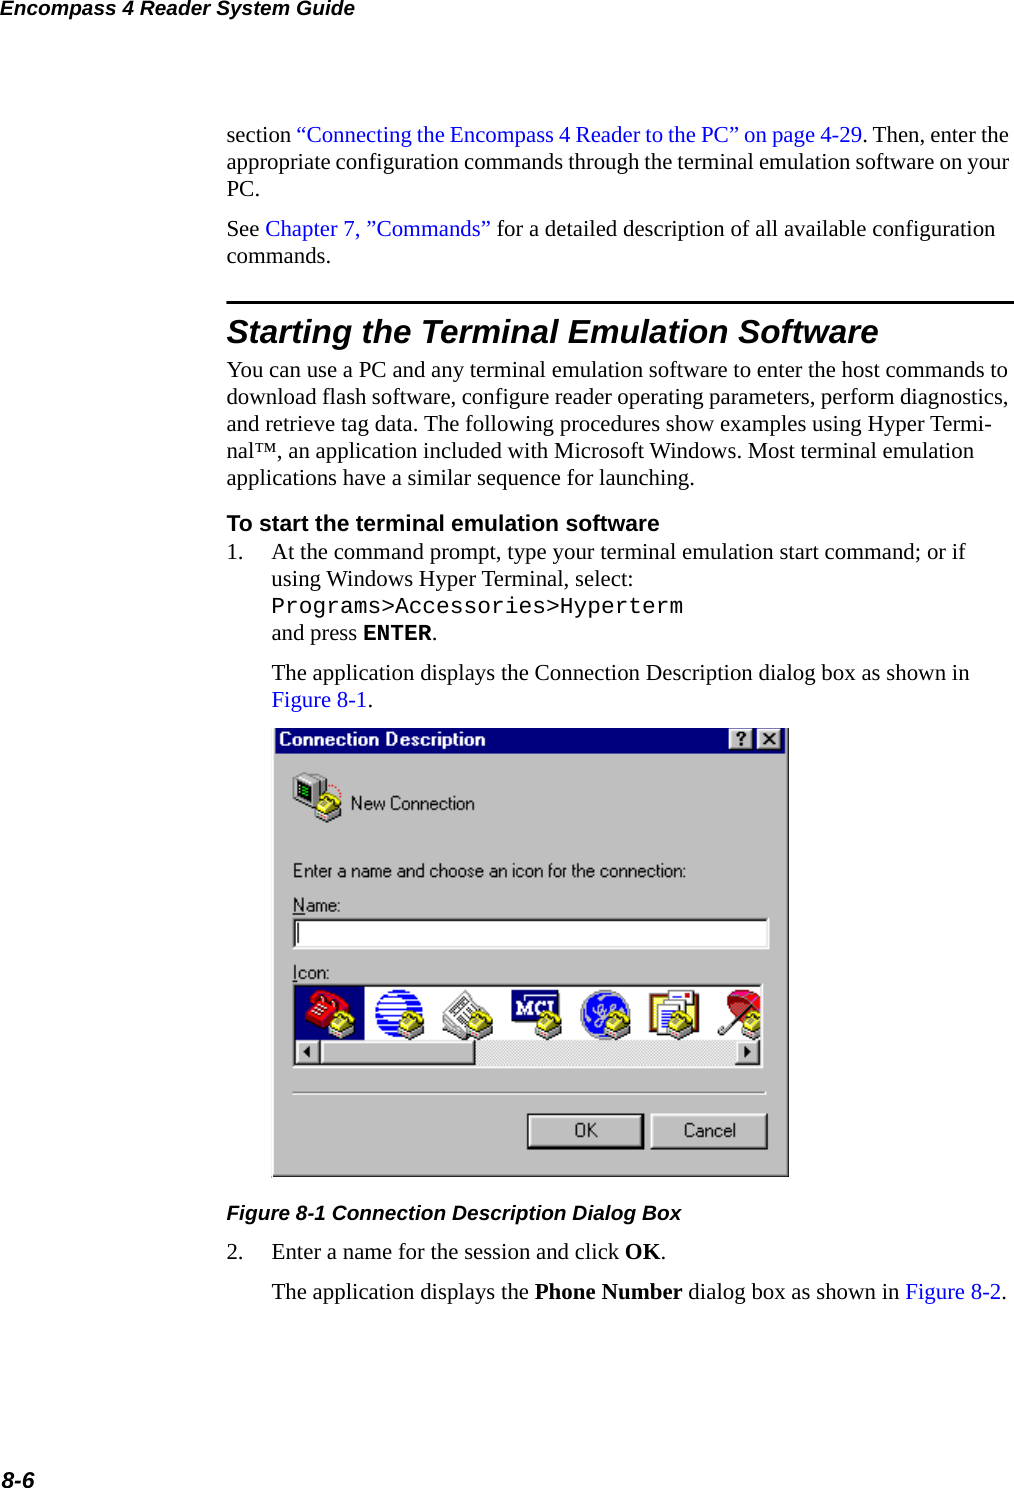 Encompass 4 Reader System Guide8-6section “Connecting the Encompass 4 Reader to the PC” on page 4-29. Then, enter the appropriate configuration commands through the terminal emulation software on your PC. See Chapter 7, ”Commands” for a detailed description of all available configuration commands.Starting the Terminal Emulation SoftwareYou can use a PC and any terminal emulation software to enter the host commands to download flash software, configure reader operating parameters, perform diagnostics, and retrieve tag data. The following procedures show examples using Hyper Termi-nal™, an application included with Microsoft Windows. Most terminal emulation applications have a similar sequence for launching.To start the terminal emulation software1. At the command prompt, type your terminal emulation start command; or if using Windows Hyper Terminal, select: Programs&gt;Accessories&gt;Hypertermand press ENTER.The application displays the Connection Description dialog box as shown in Figure 8-1.Figure 8-1 Connection Description Dialog Box2. Enter a name for the session and click OK.The application displays the Phone Number dialog box as shown in Figure 8-2.